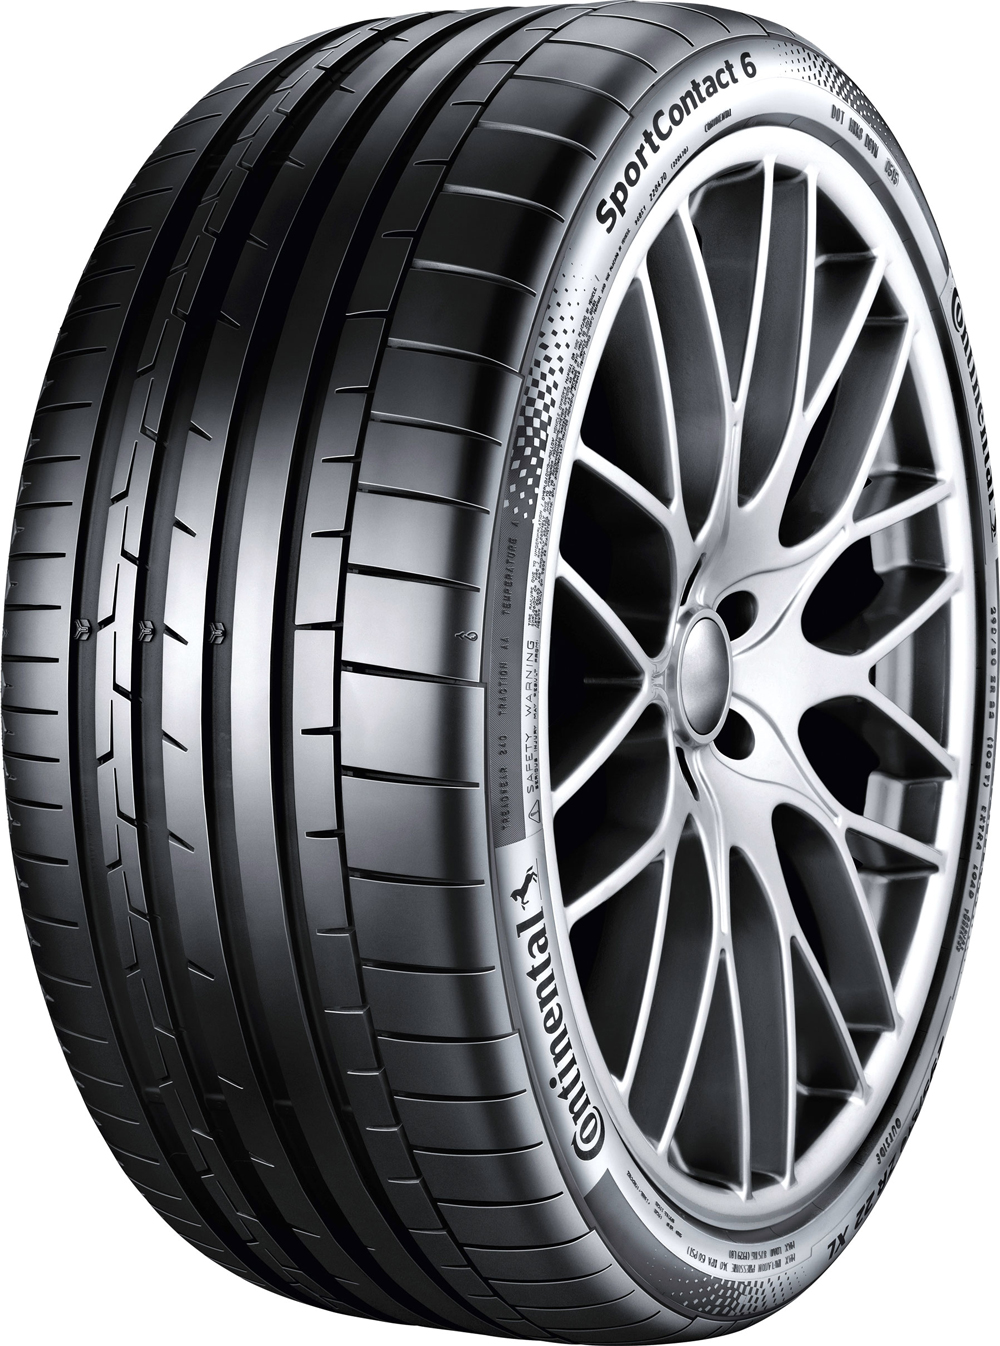 Автомобилни гуми CONTINENTAL SportContact 6 ContiSilent XL AUDI 255/40 R20 101Y